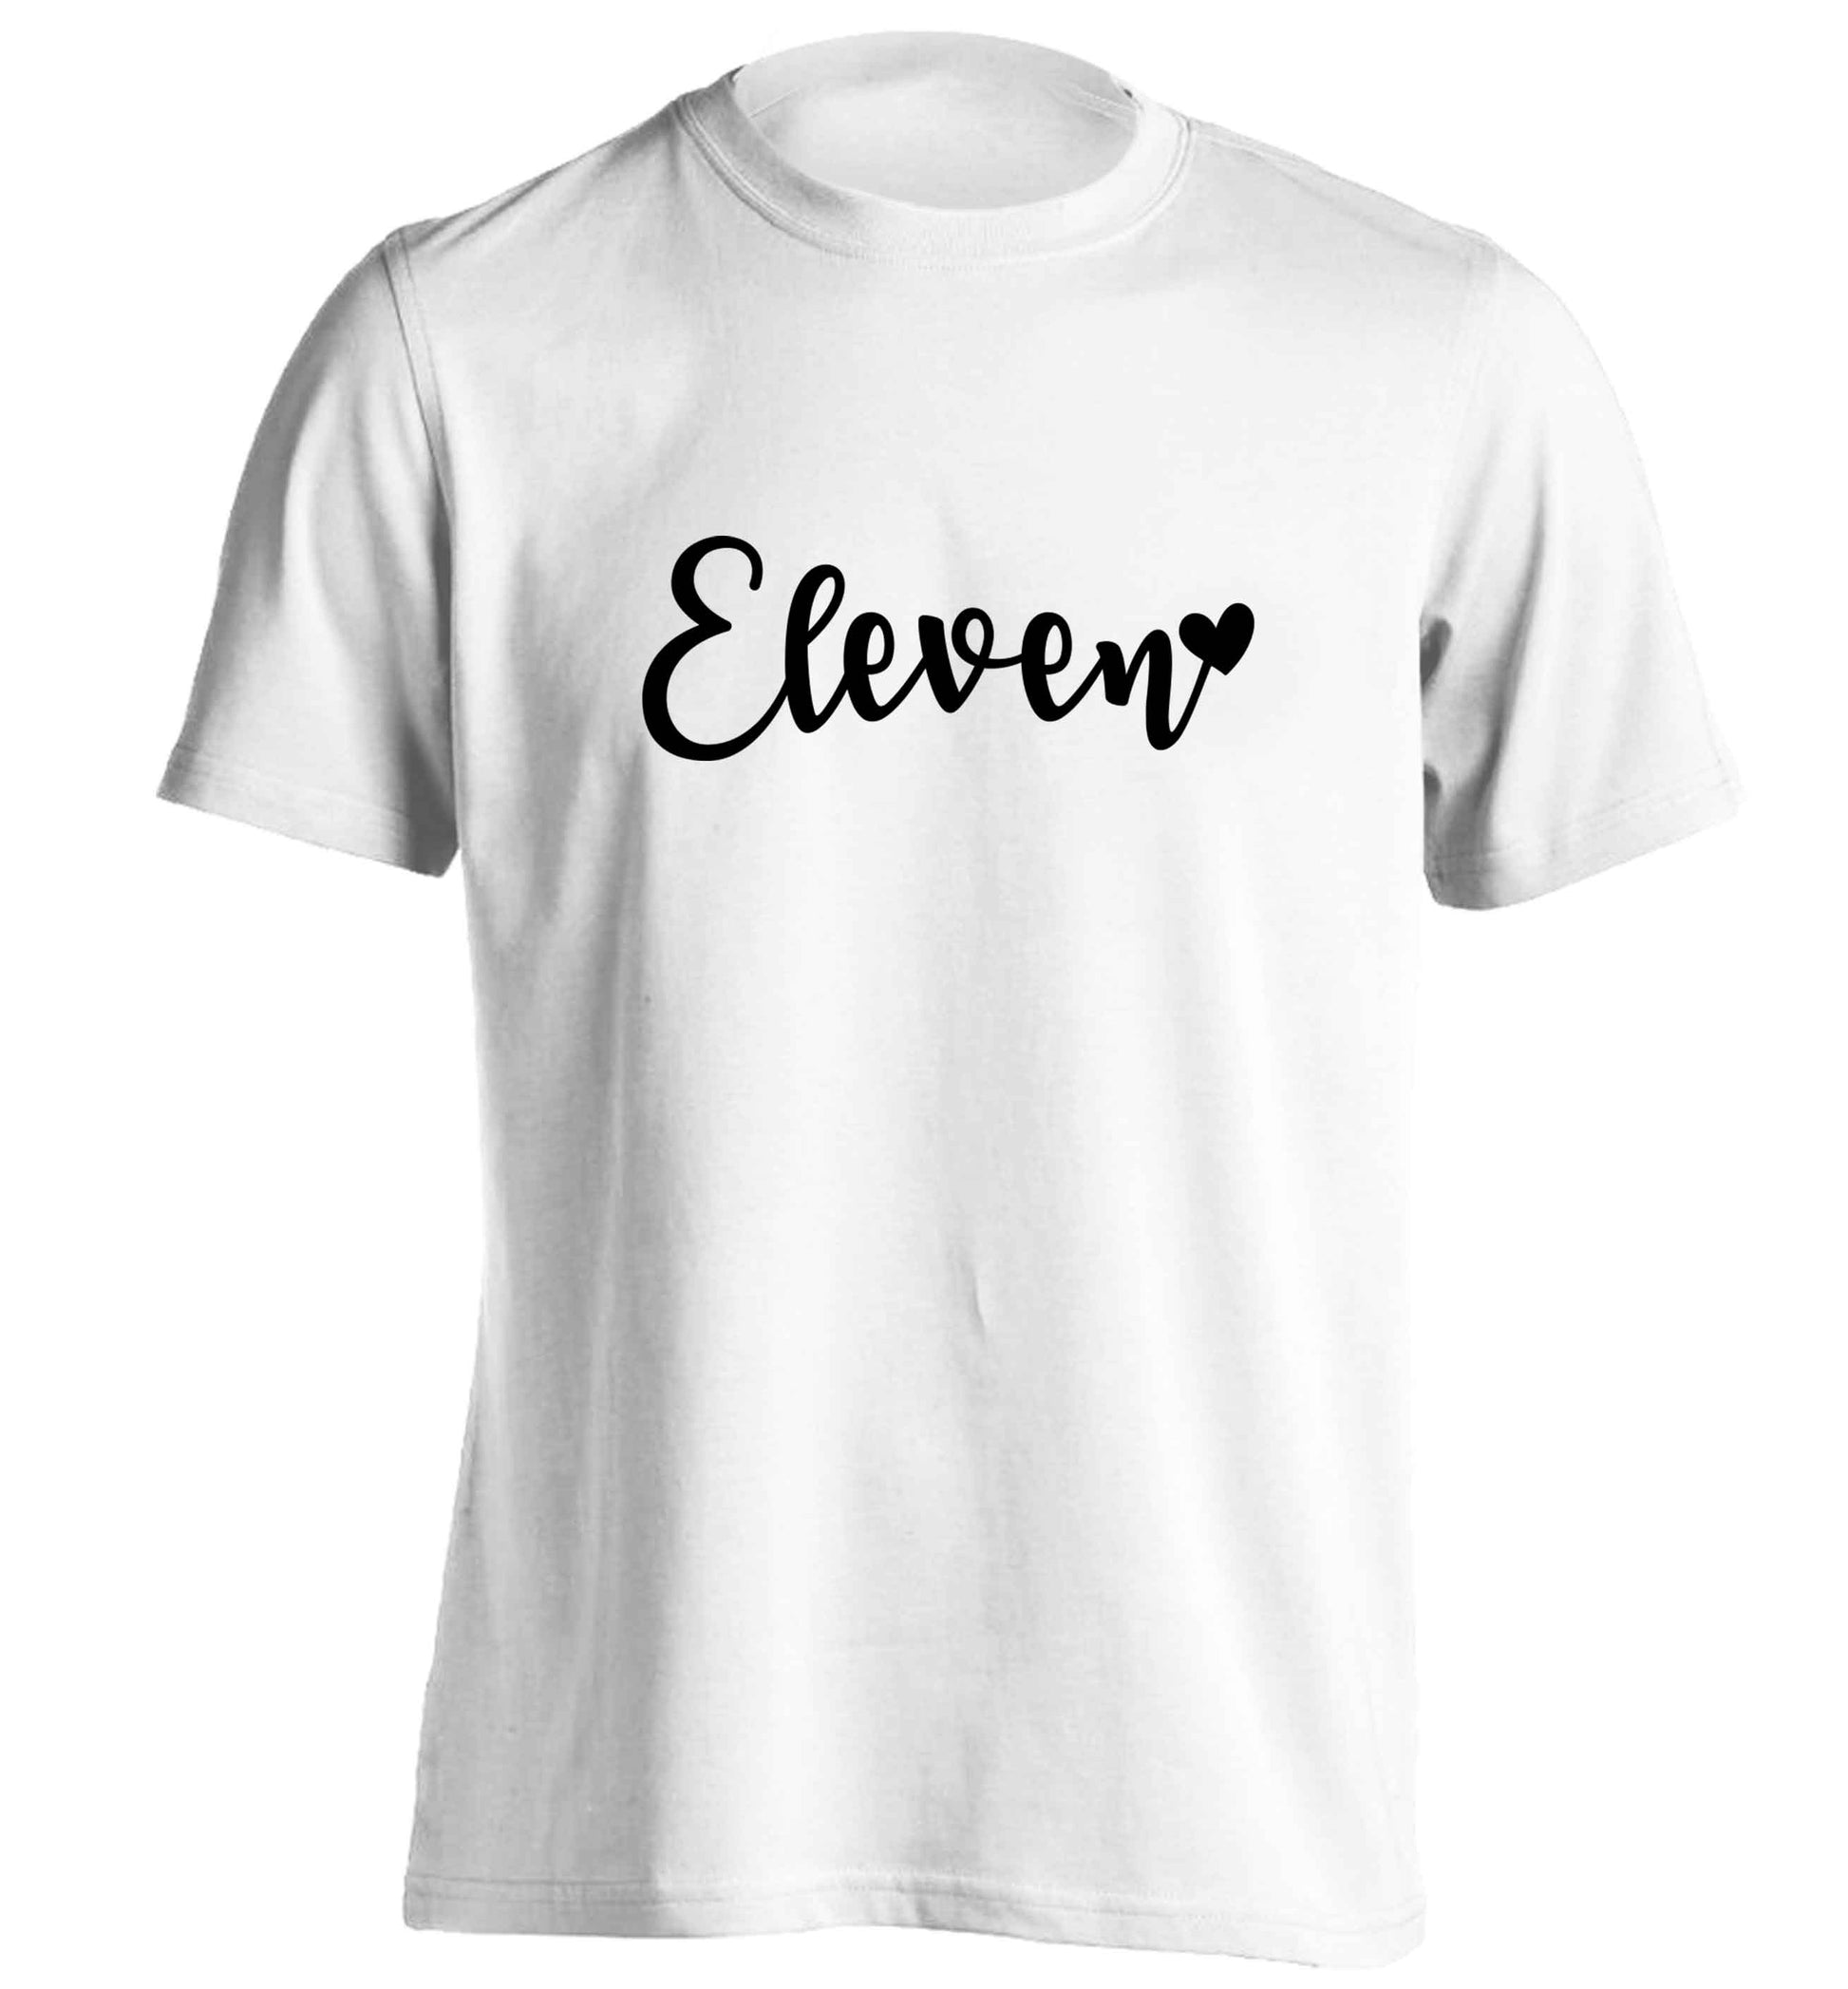 Eleven and heart! adults unisex white Tshirt 2XL